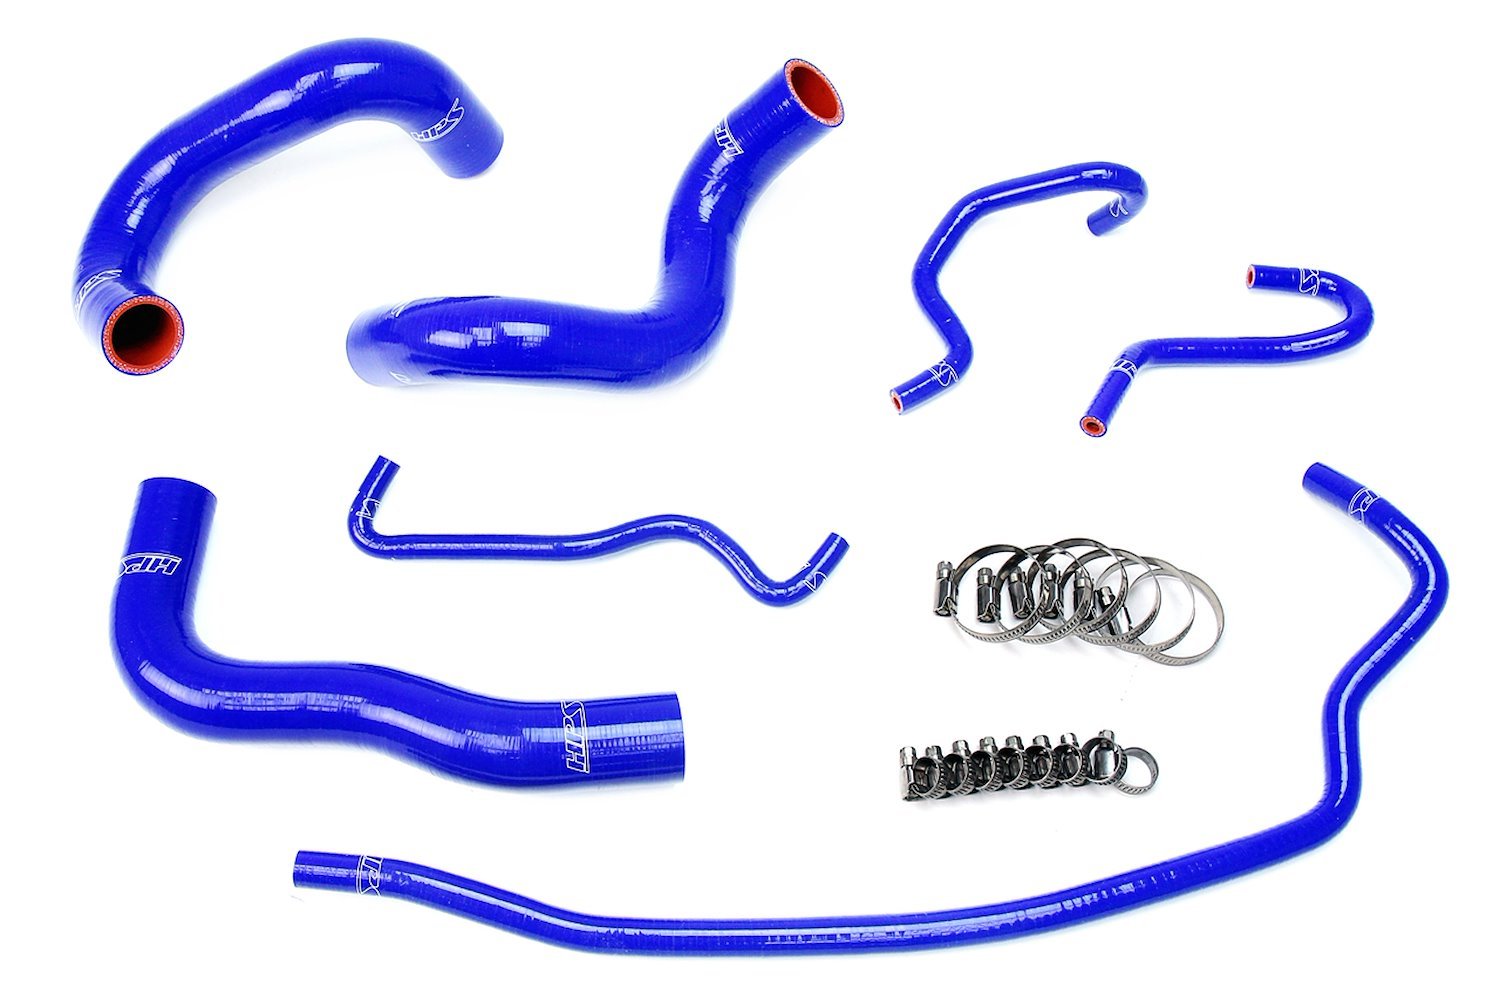 57-1724-BLUE Radiator Hose Kit, High-Temp 3-Ply Reinforced Silicone, Replace OEM Rubber Radiator Coolant Hoses